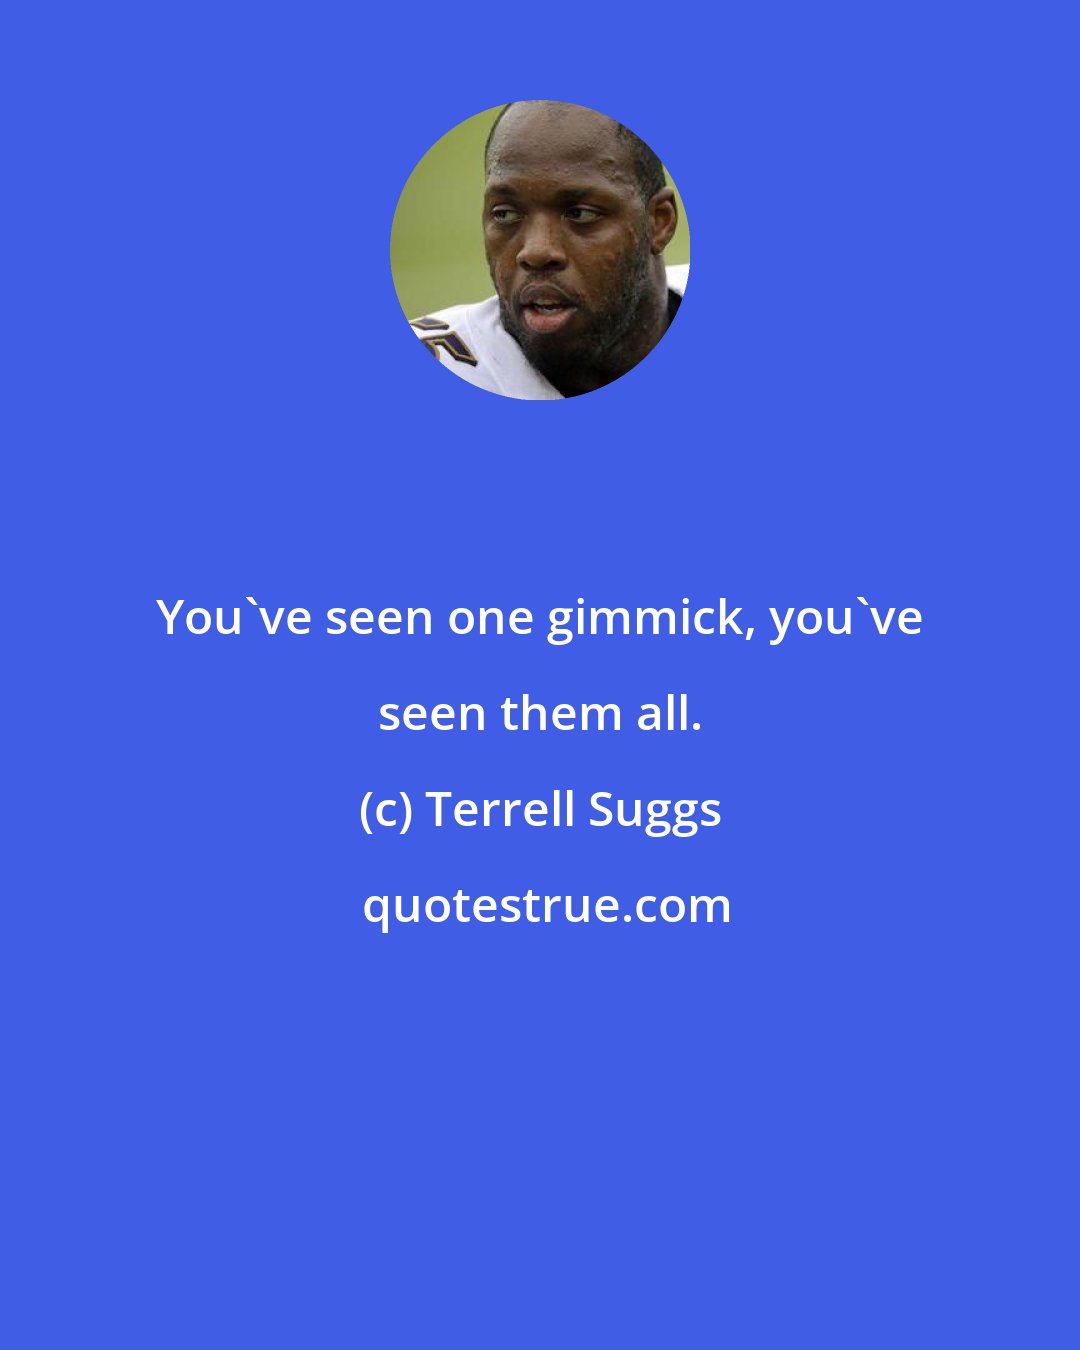 Terrell Suggs: You've seen one gimmick, you've seen them all.